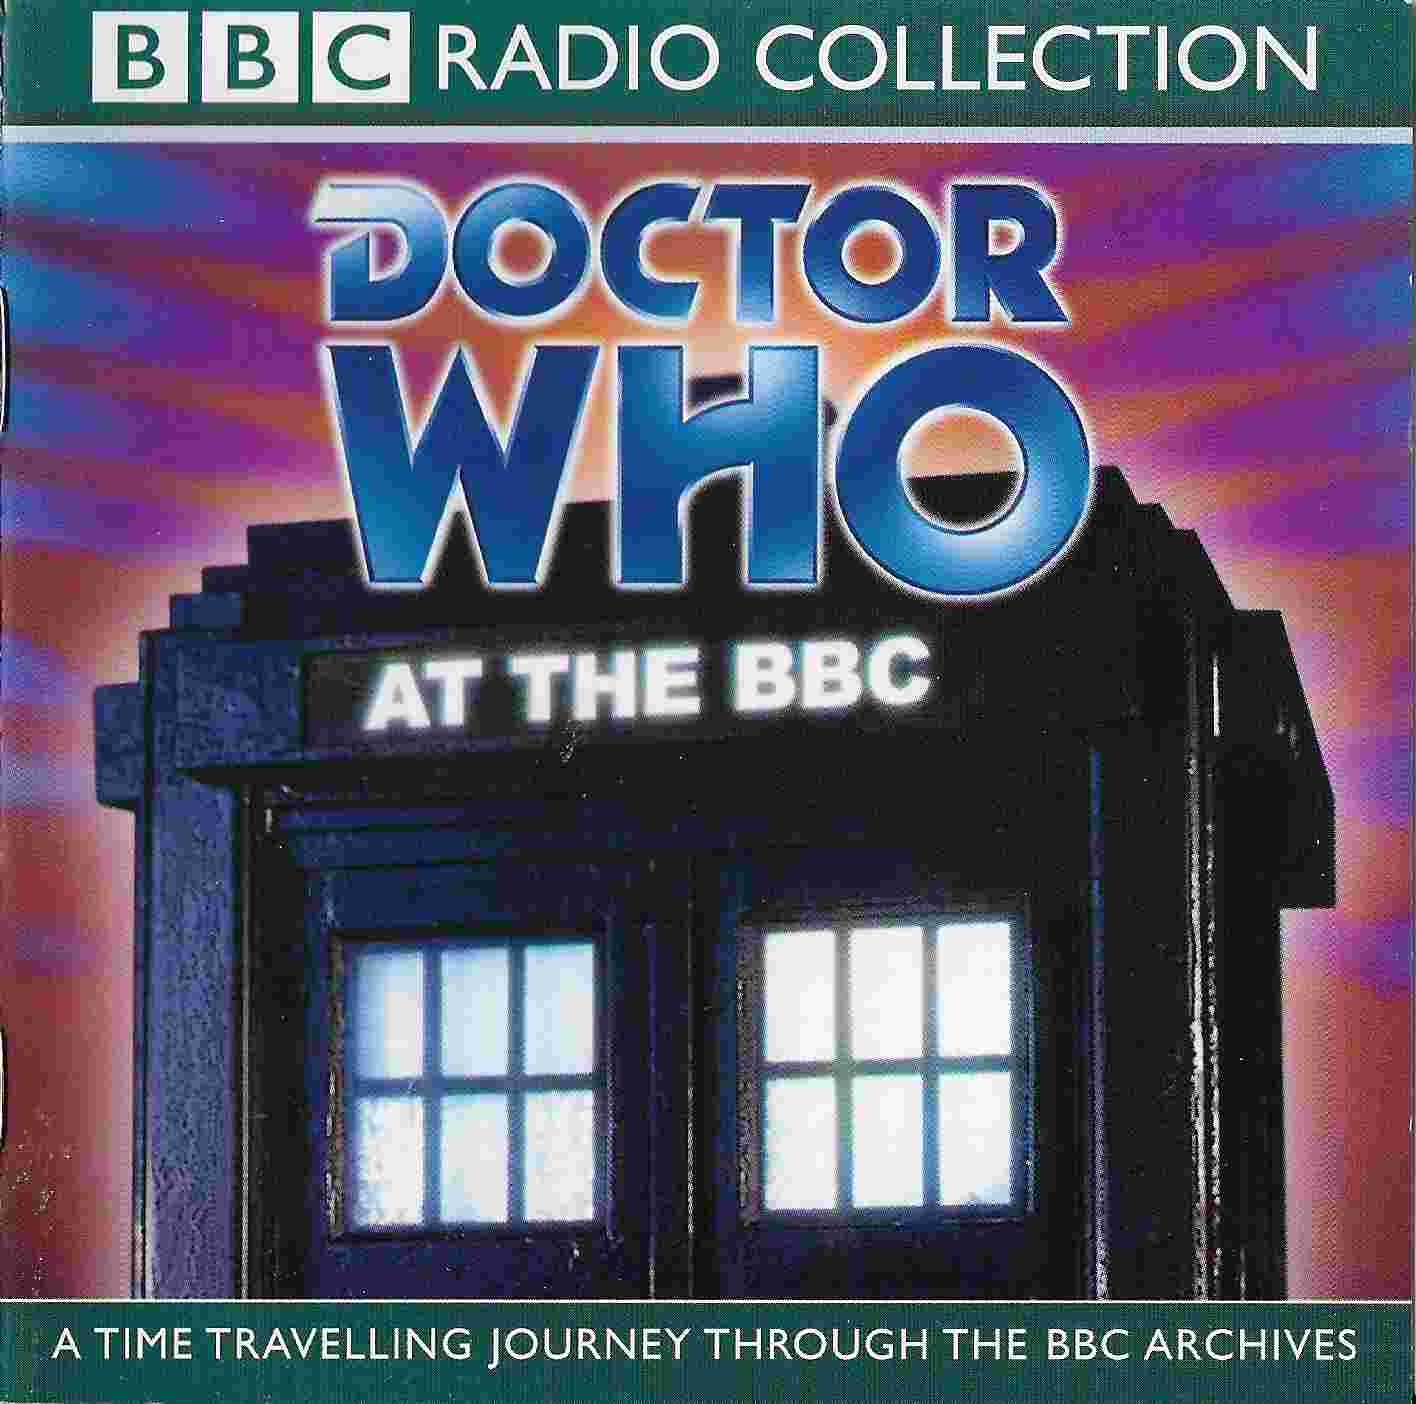 Picture of ISBN 0-563-53087-1 Doctor Who at the BBC - A time travelling journey through the BBC archives by artist Elisabeth Sladen / Nicholas Courtney from the BBC records and Tapes library